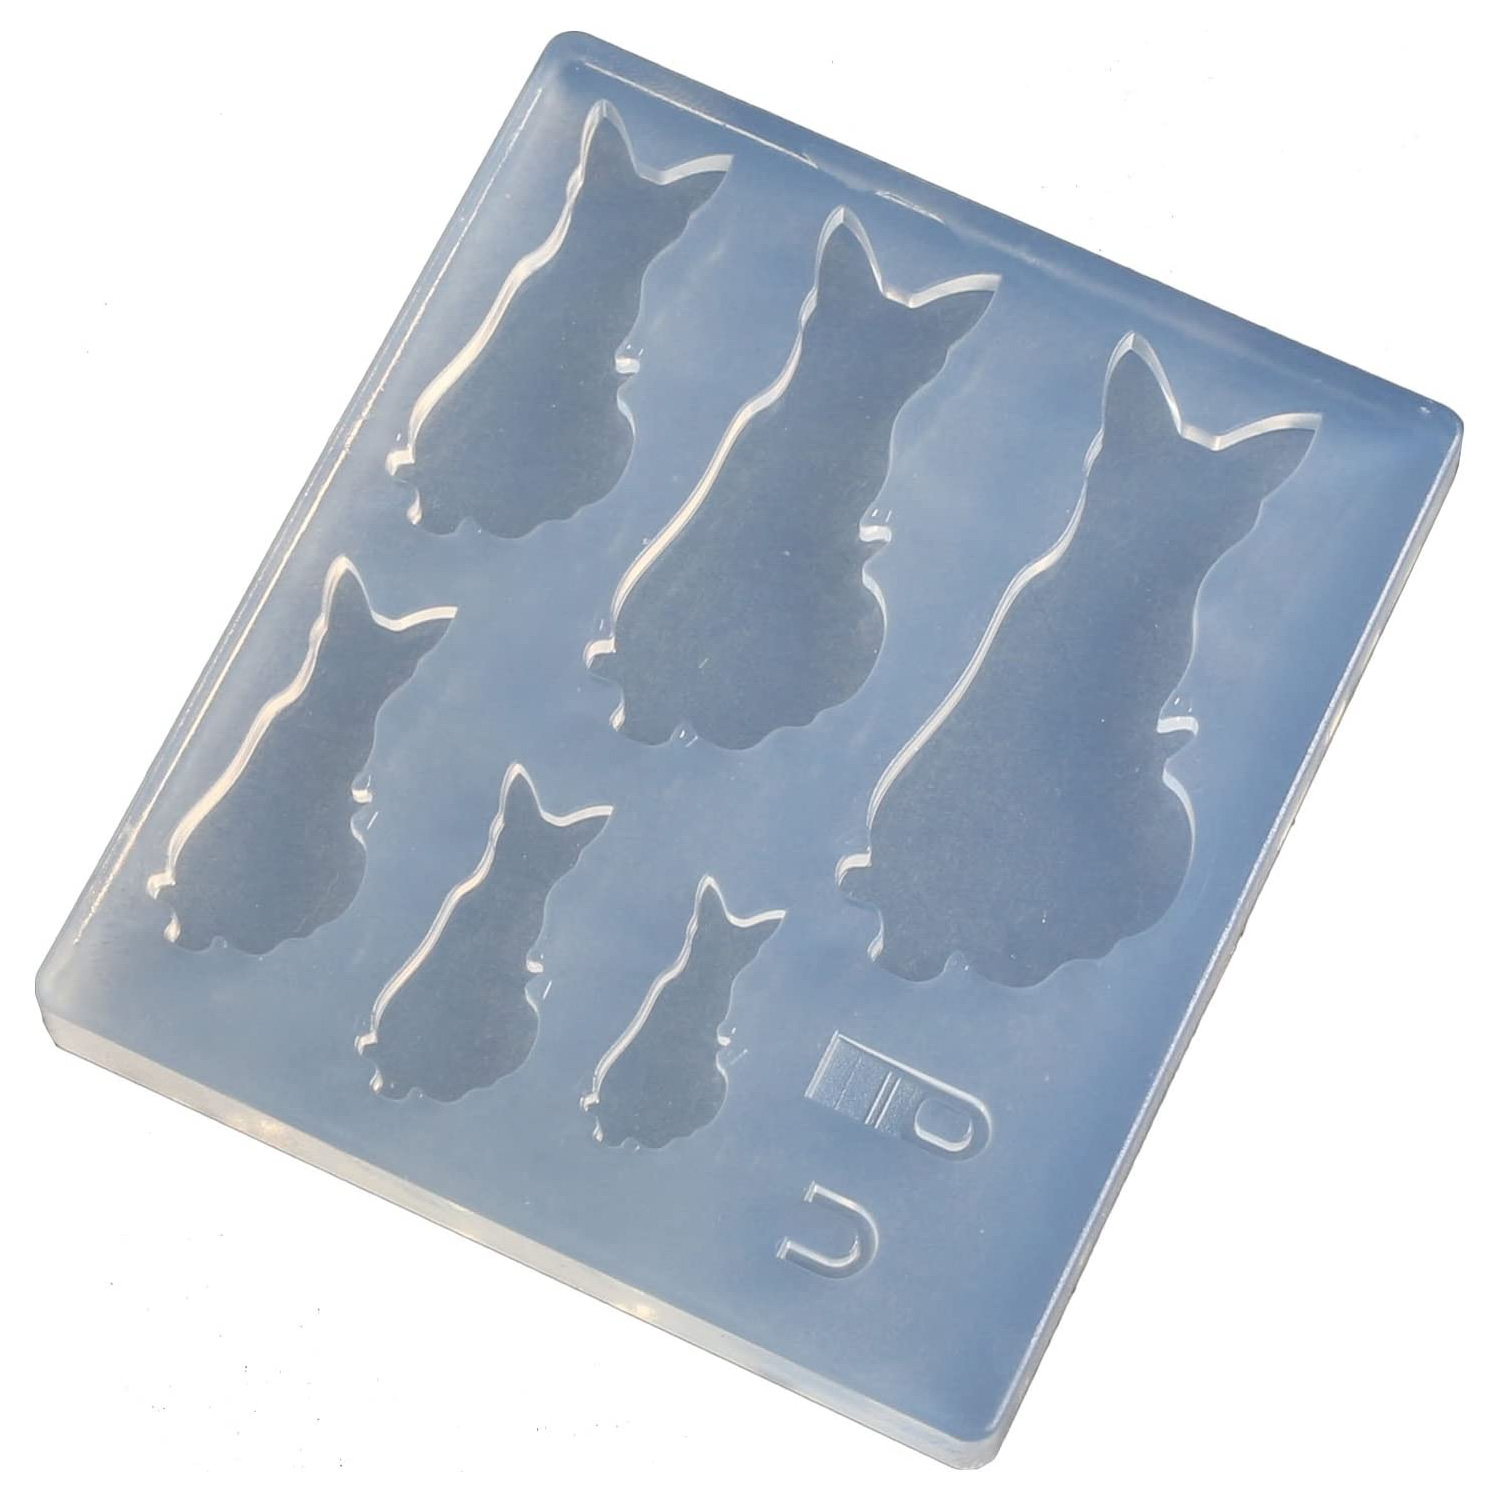 KAM-REJ-619  Resin Crafting Silicone Mold  (pcs)